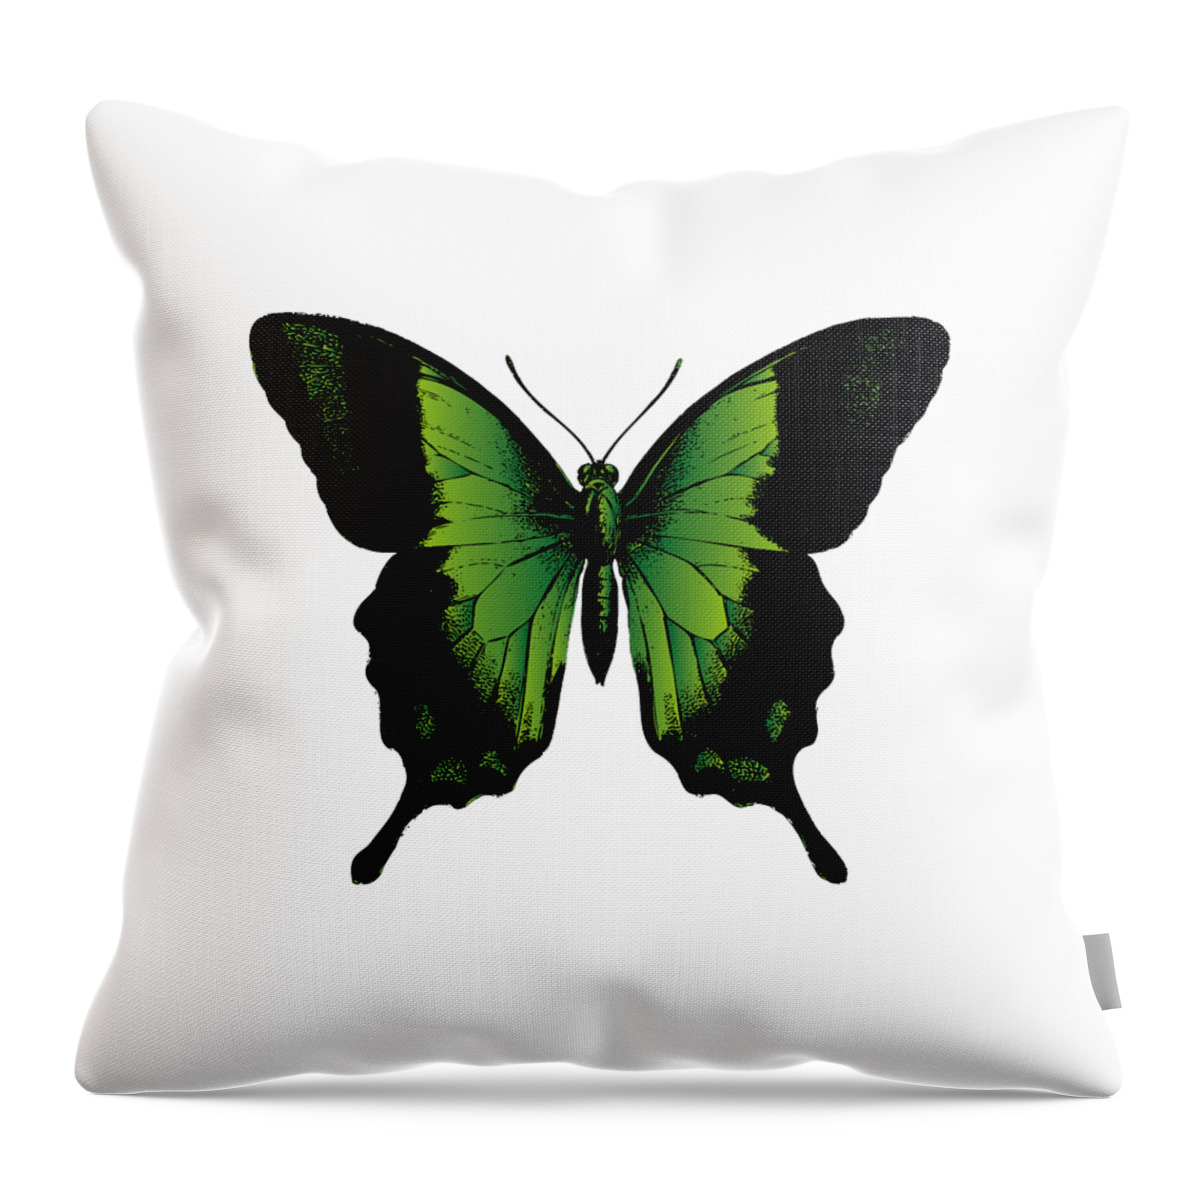 Green Butterfly Throw Pillow featuring the digital art Green Butterfly by Eclectic at Heart